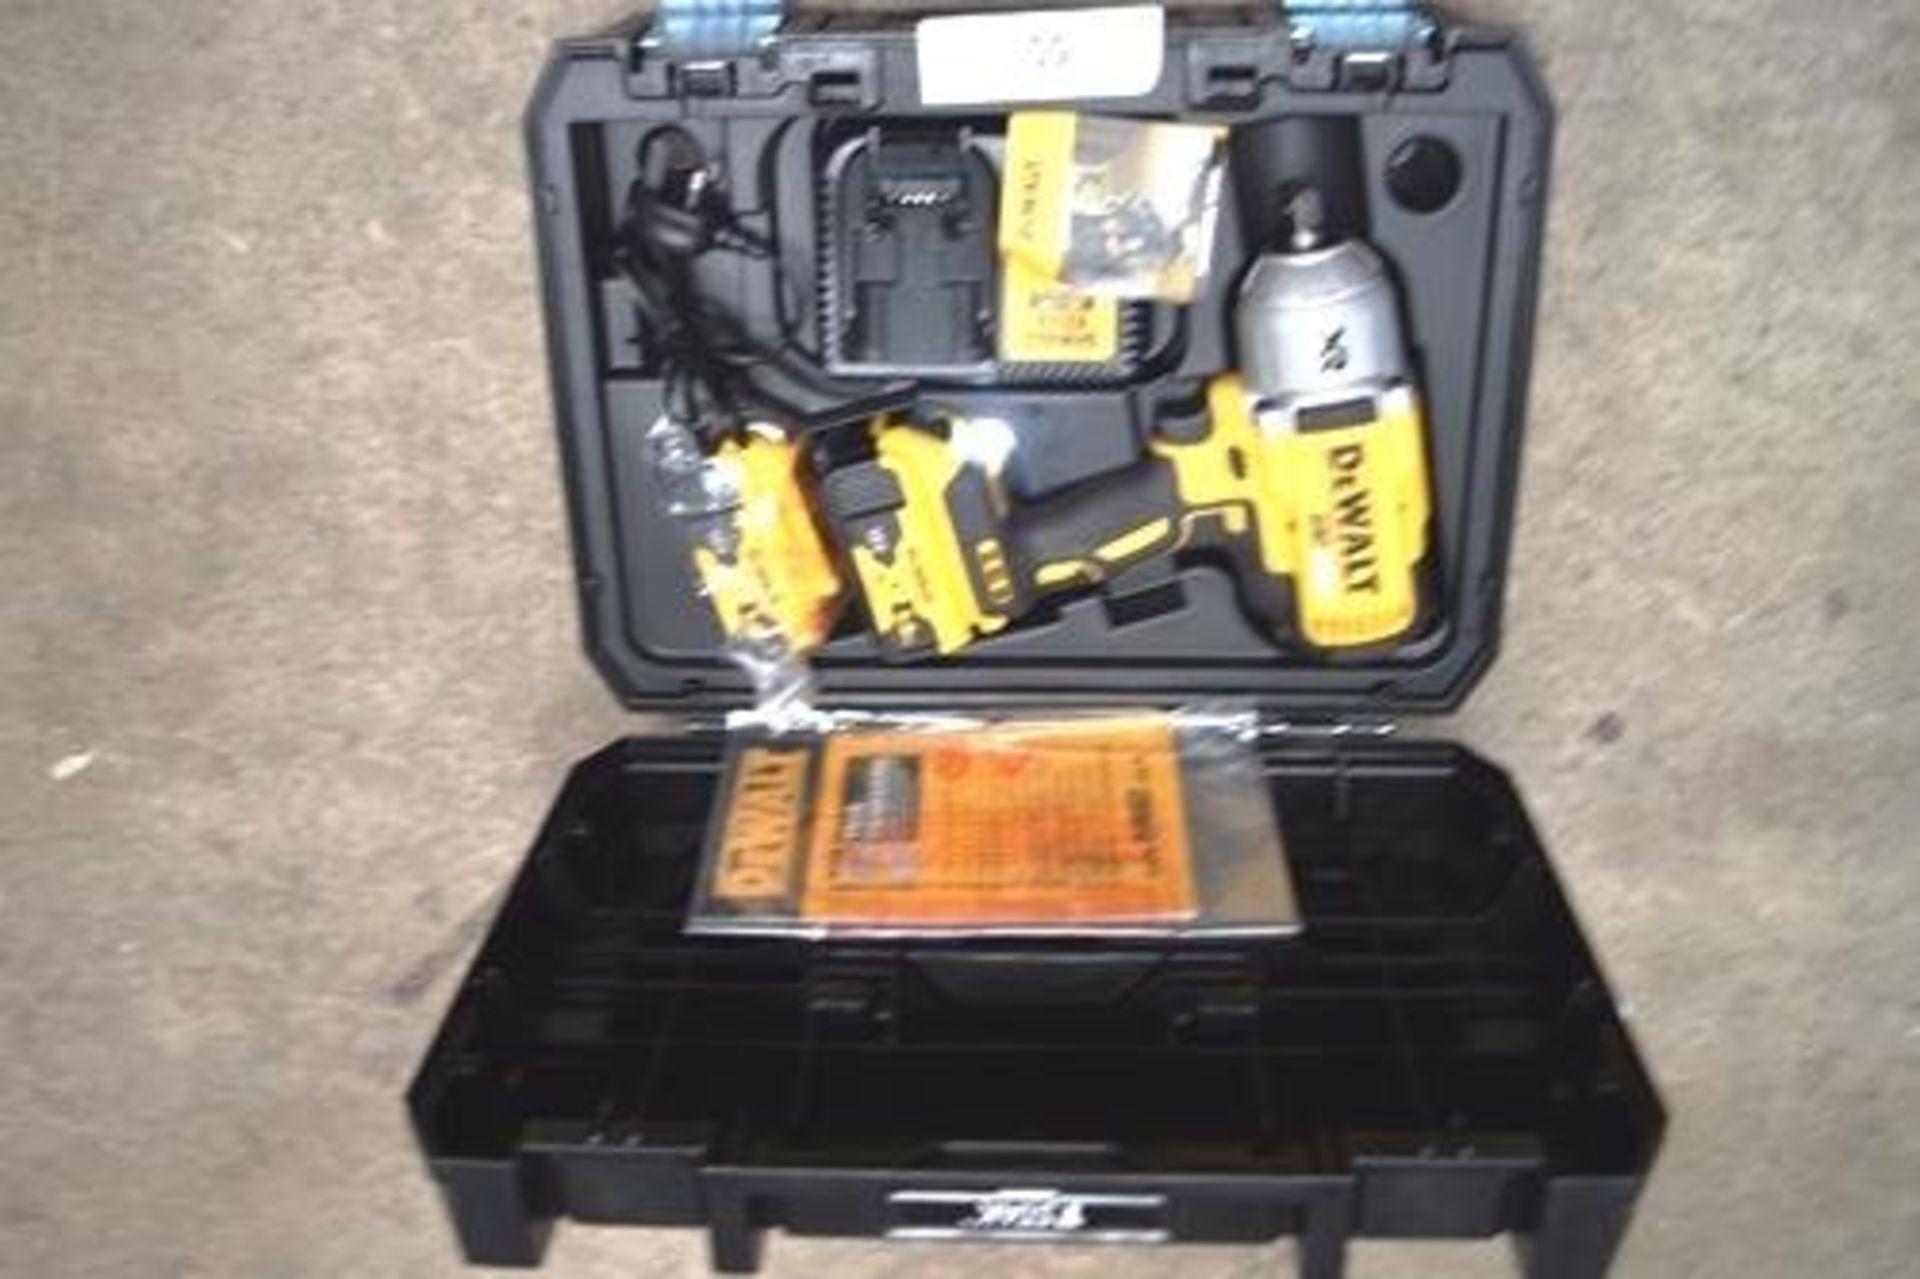 1 x DeWalt 18V high torque brushless impact wrench, model DCF899P2, 1/2" sq drive, with 2 x 18V 5. - Image 3 of 3